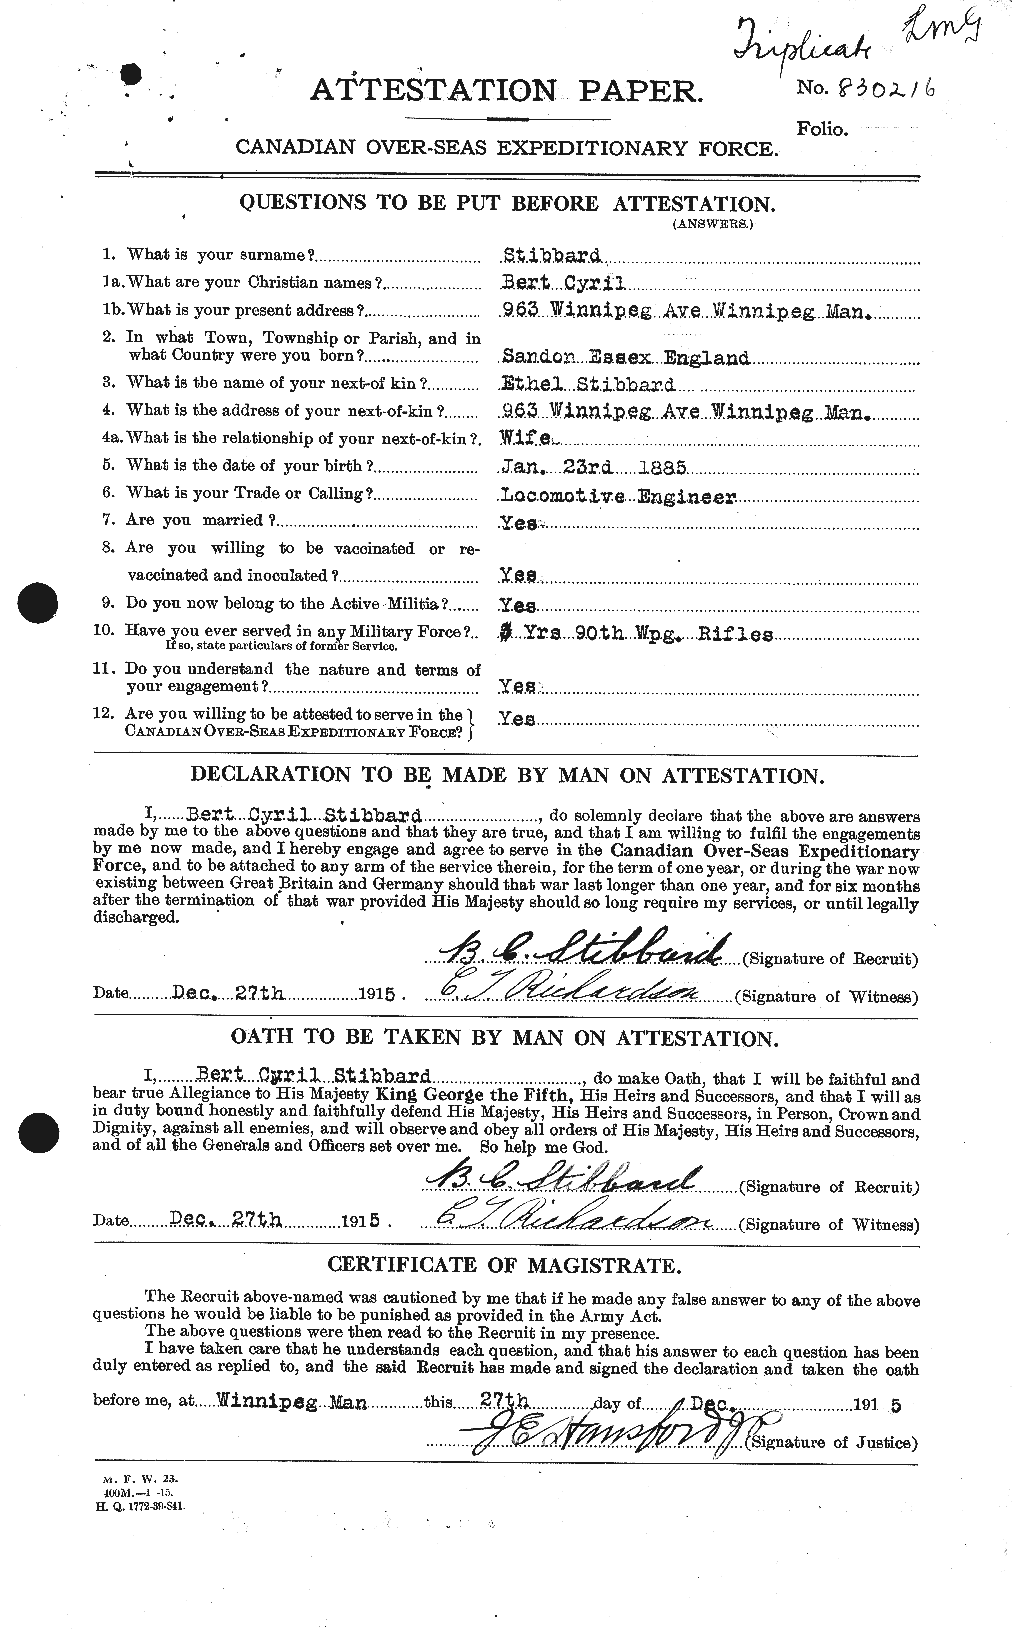 Personnel Records of the First World War - CEF 624983a